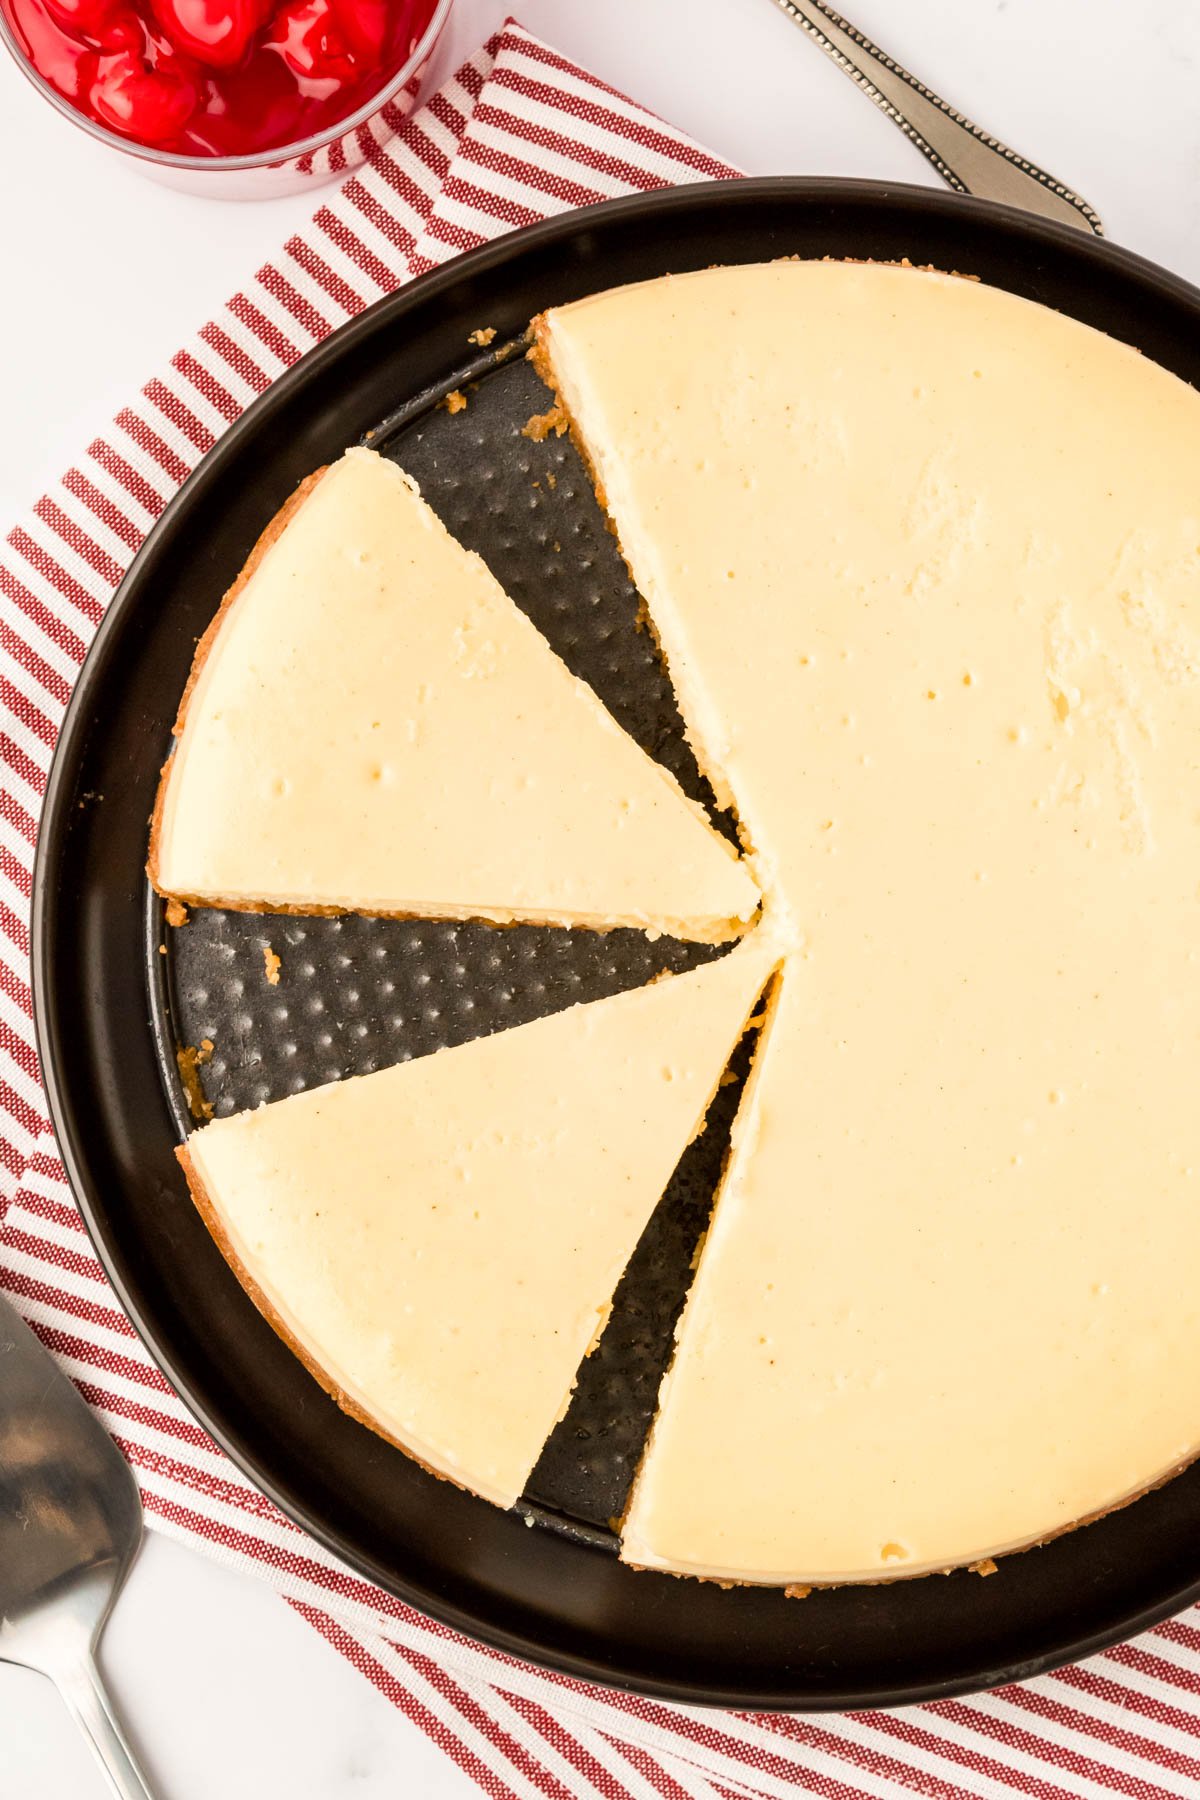 Overhead photo of a cheesecake with some slices cut and one missing.